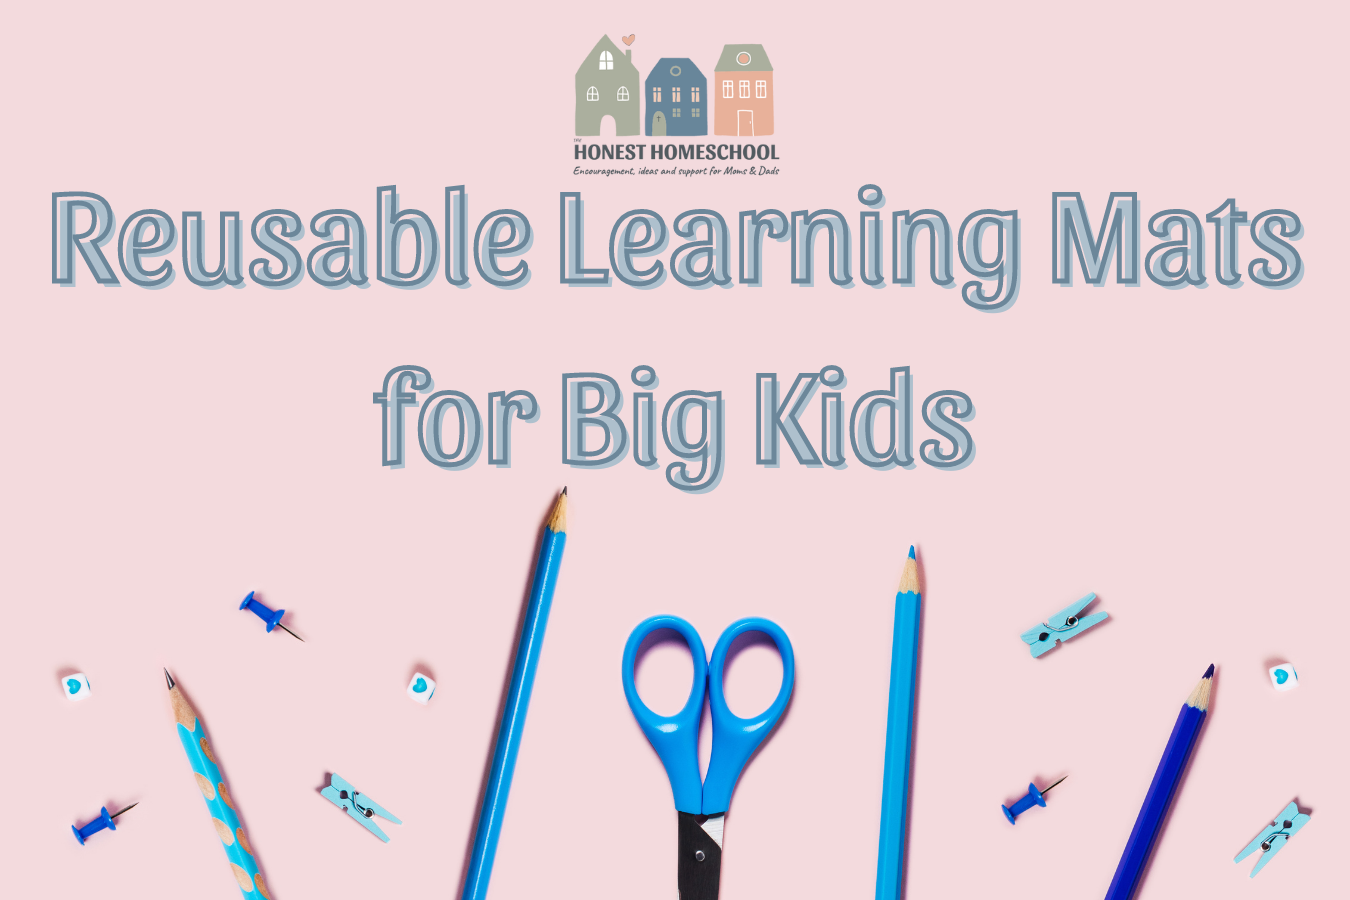 Reusable learning mats for big kids cover photo